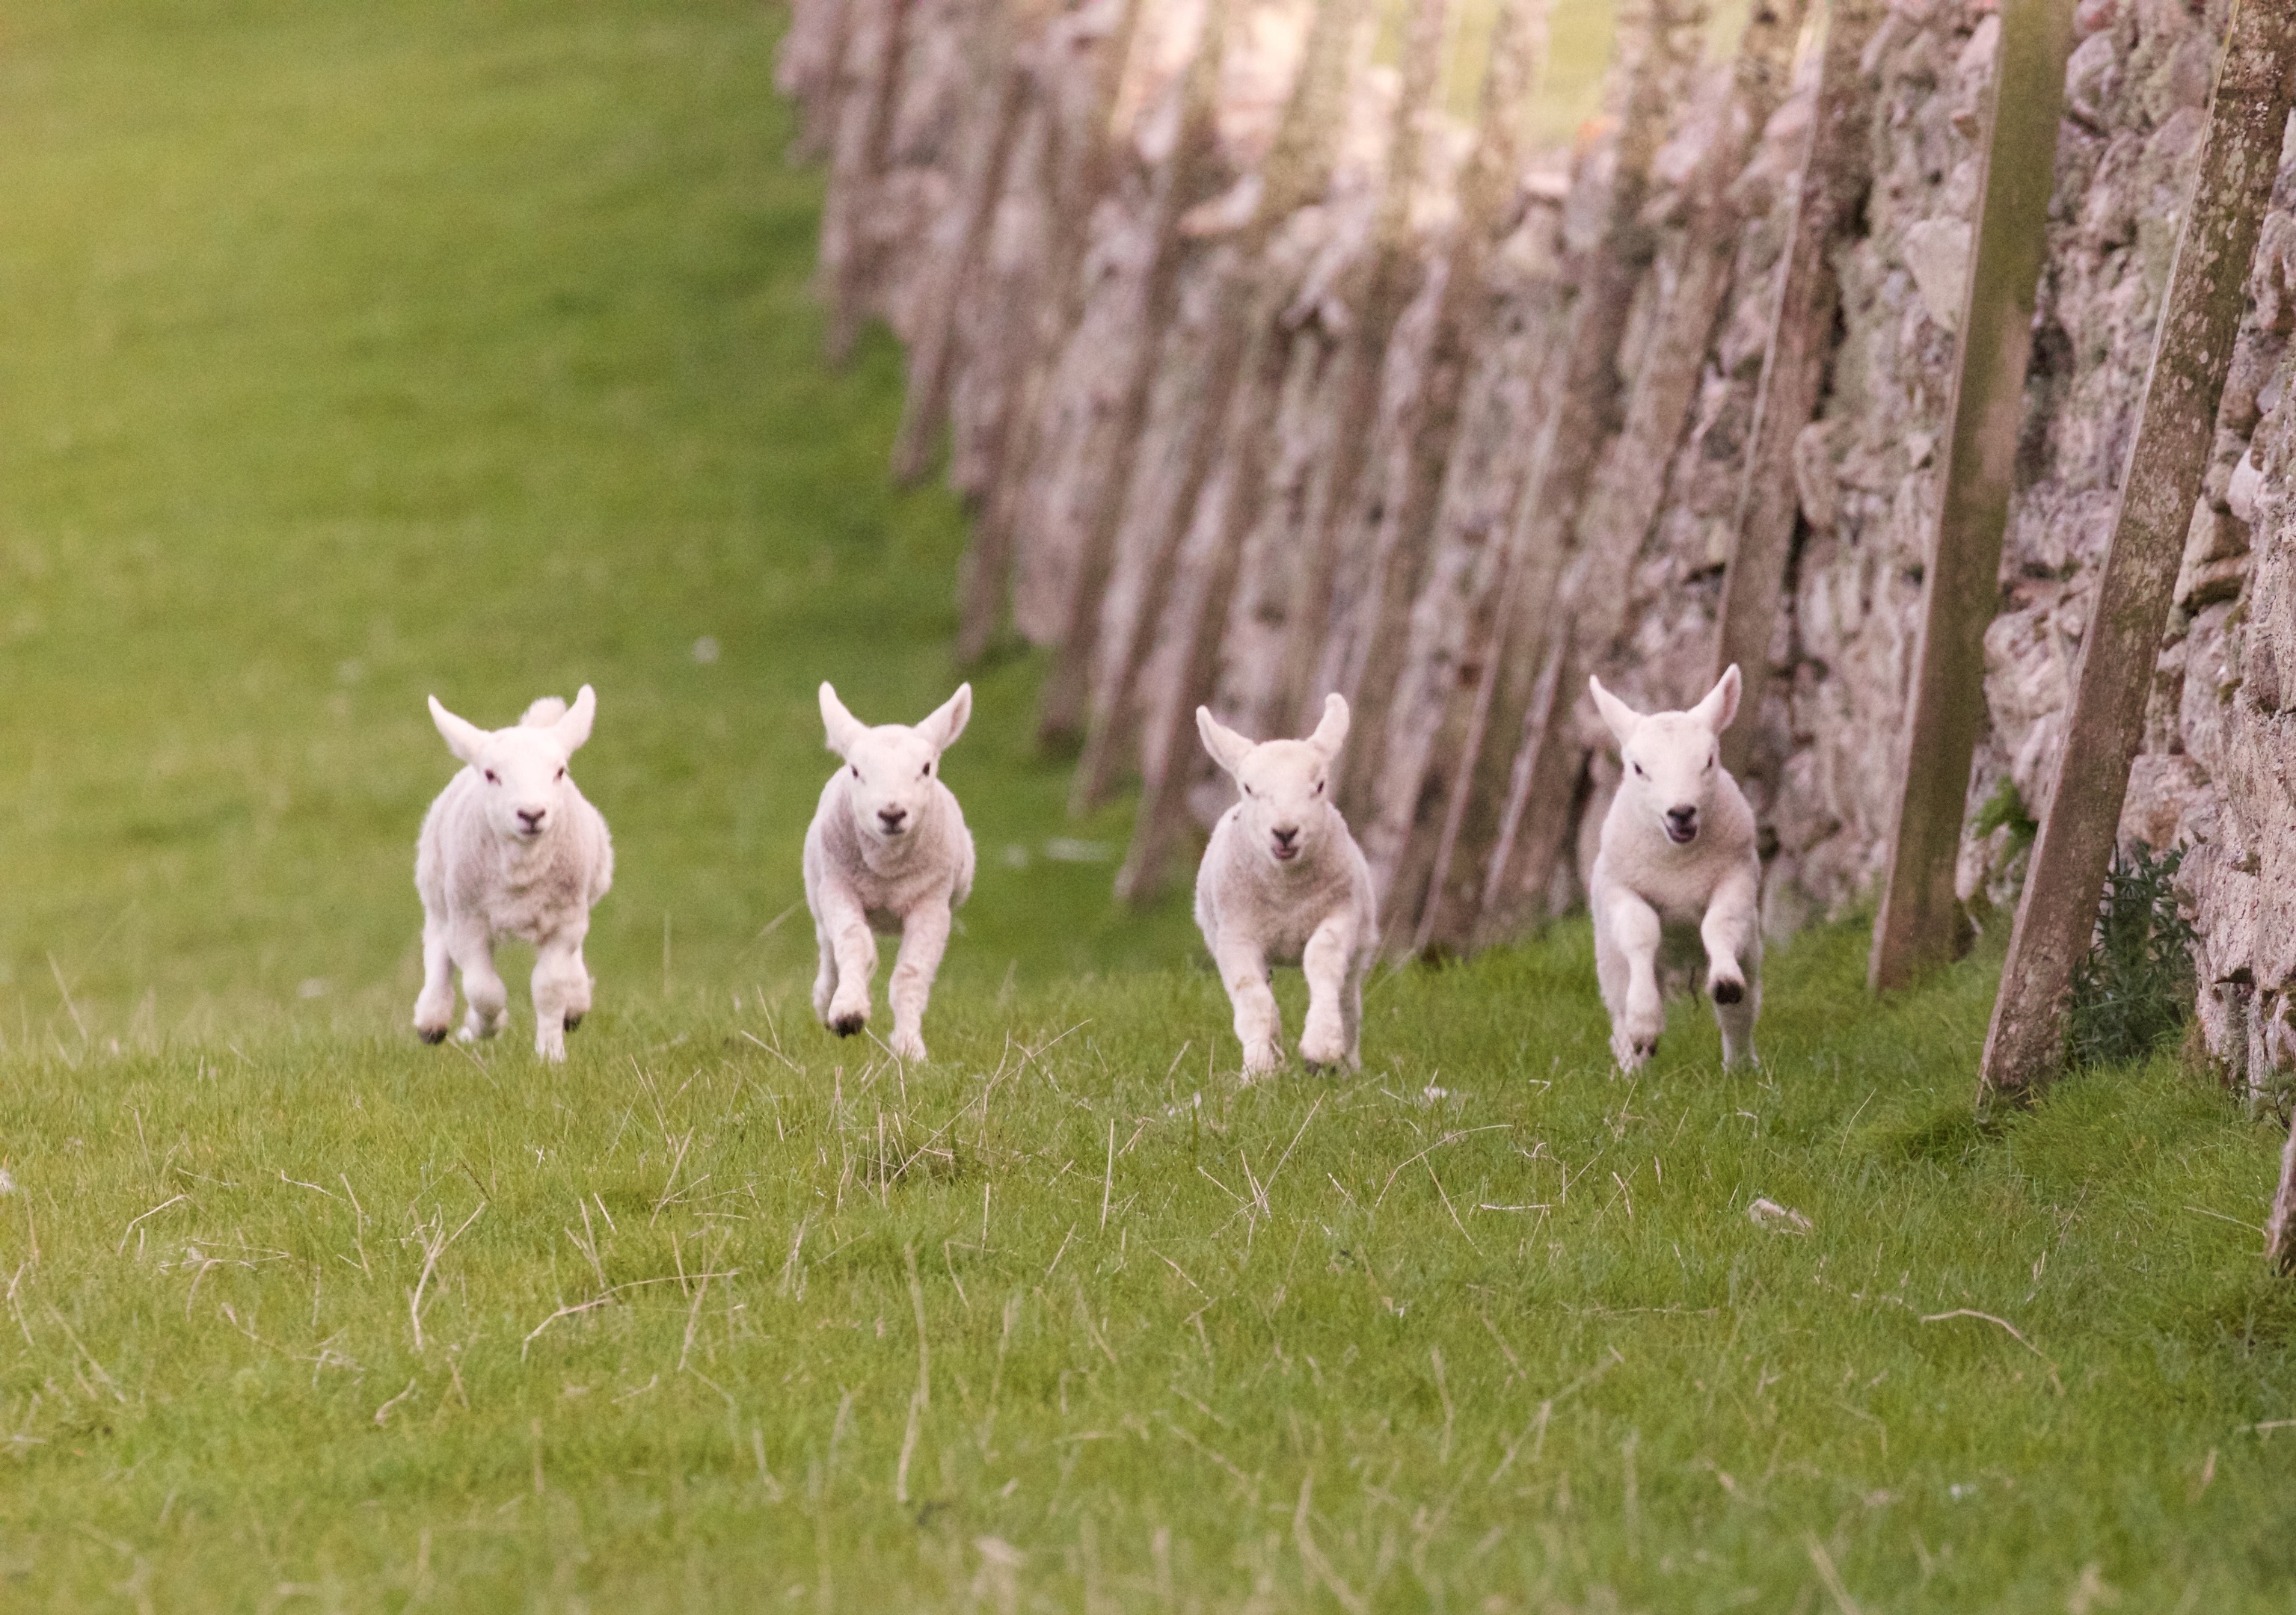 Watching lambs at play is one of the most rewarding aspects of farming